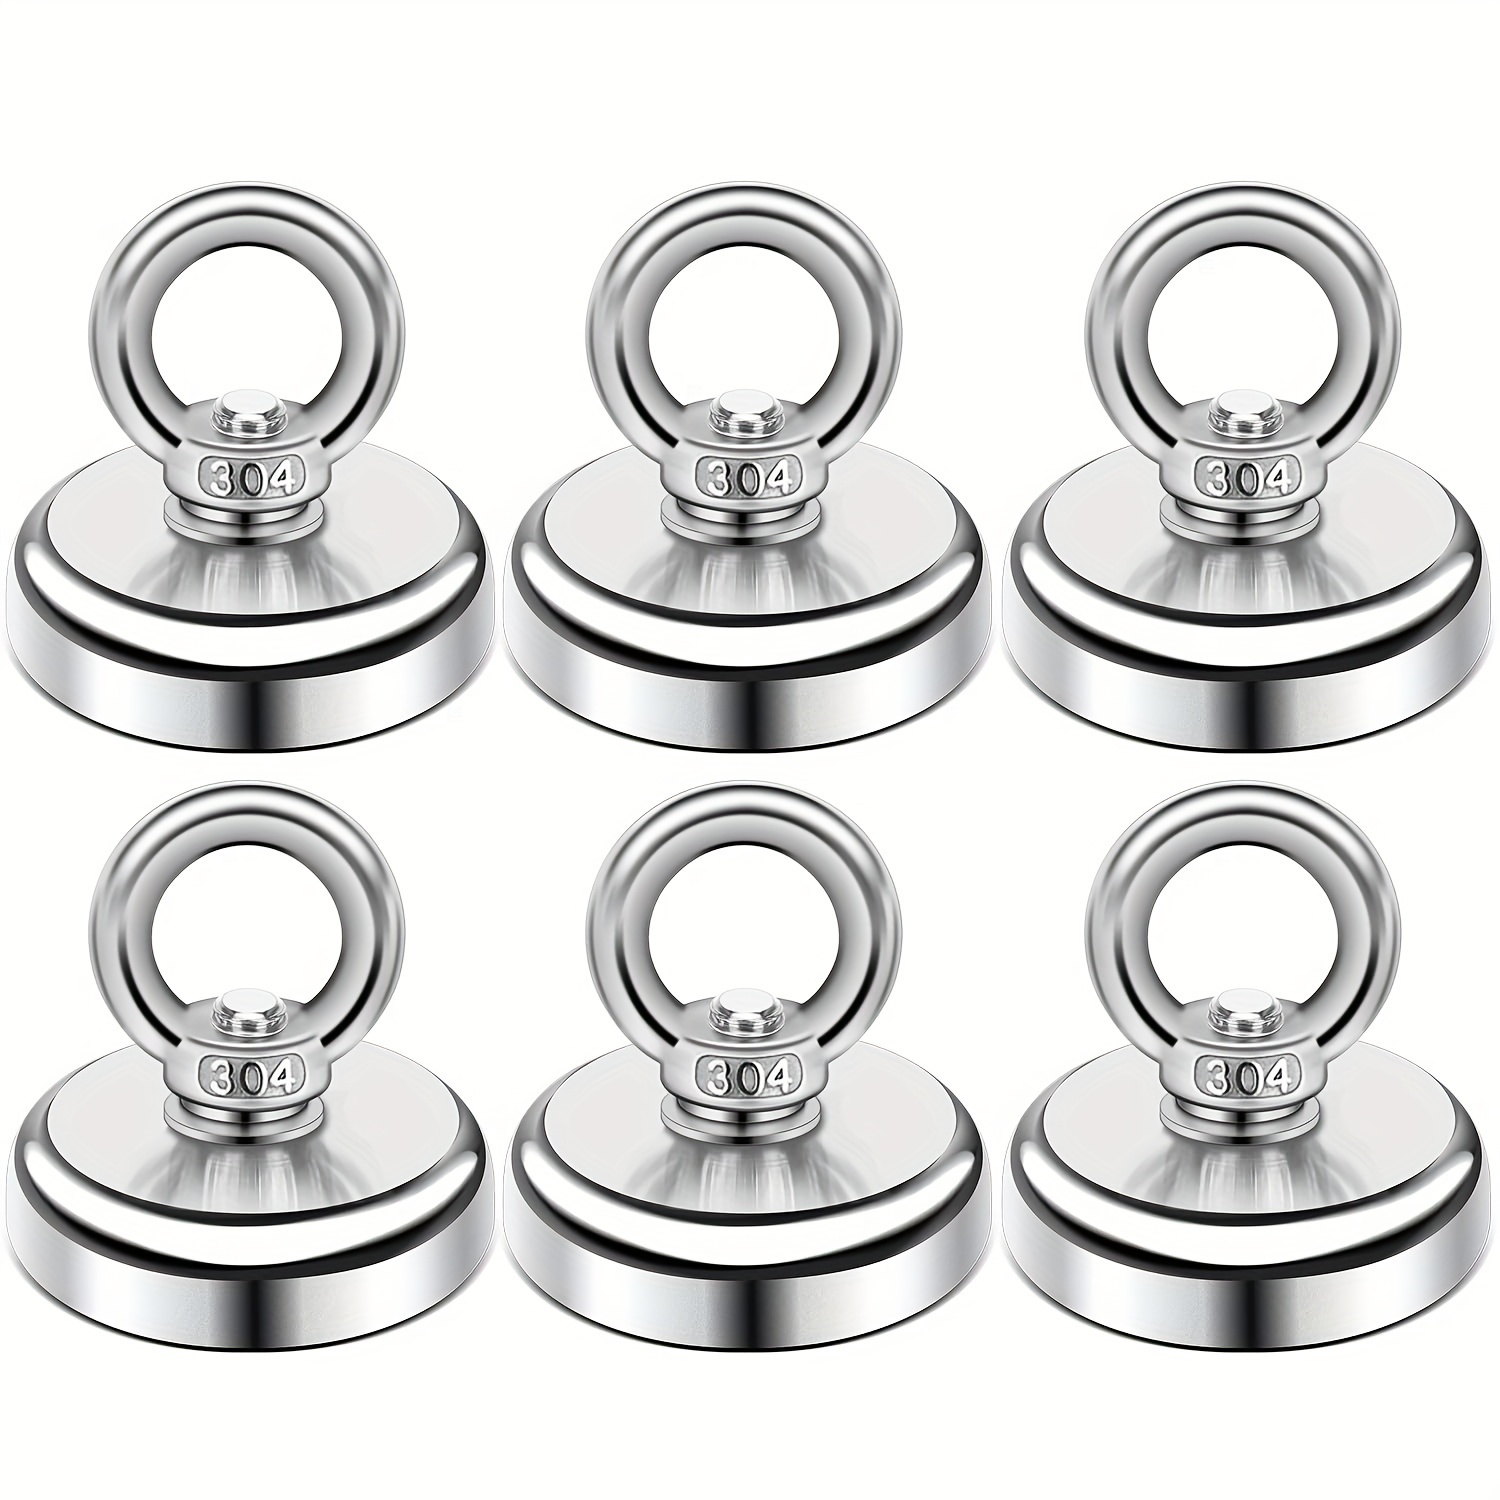 

6pcs, Magnetic Hook, 60lbs (27 Kg) Pull Rare Earth Magnetic Hook With Countersunk Eyelet Bolt For Workplace, Home, Kitchen, Fishing, Office & Garage, Silvery